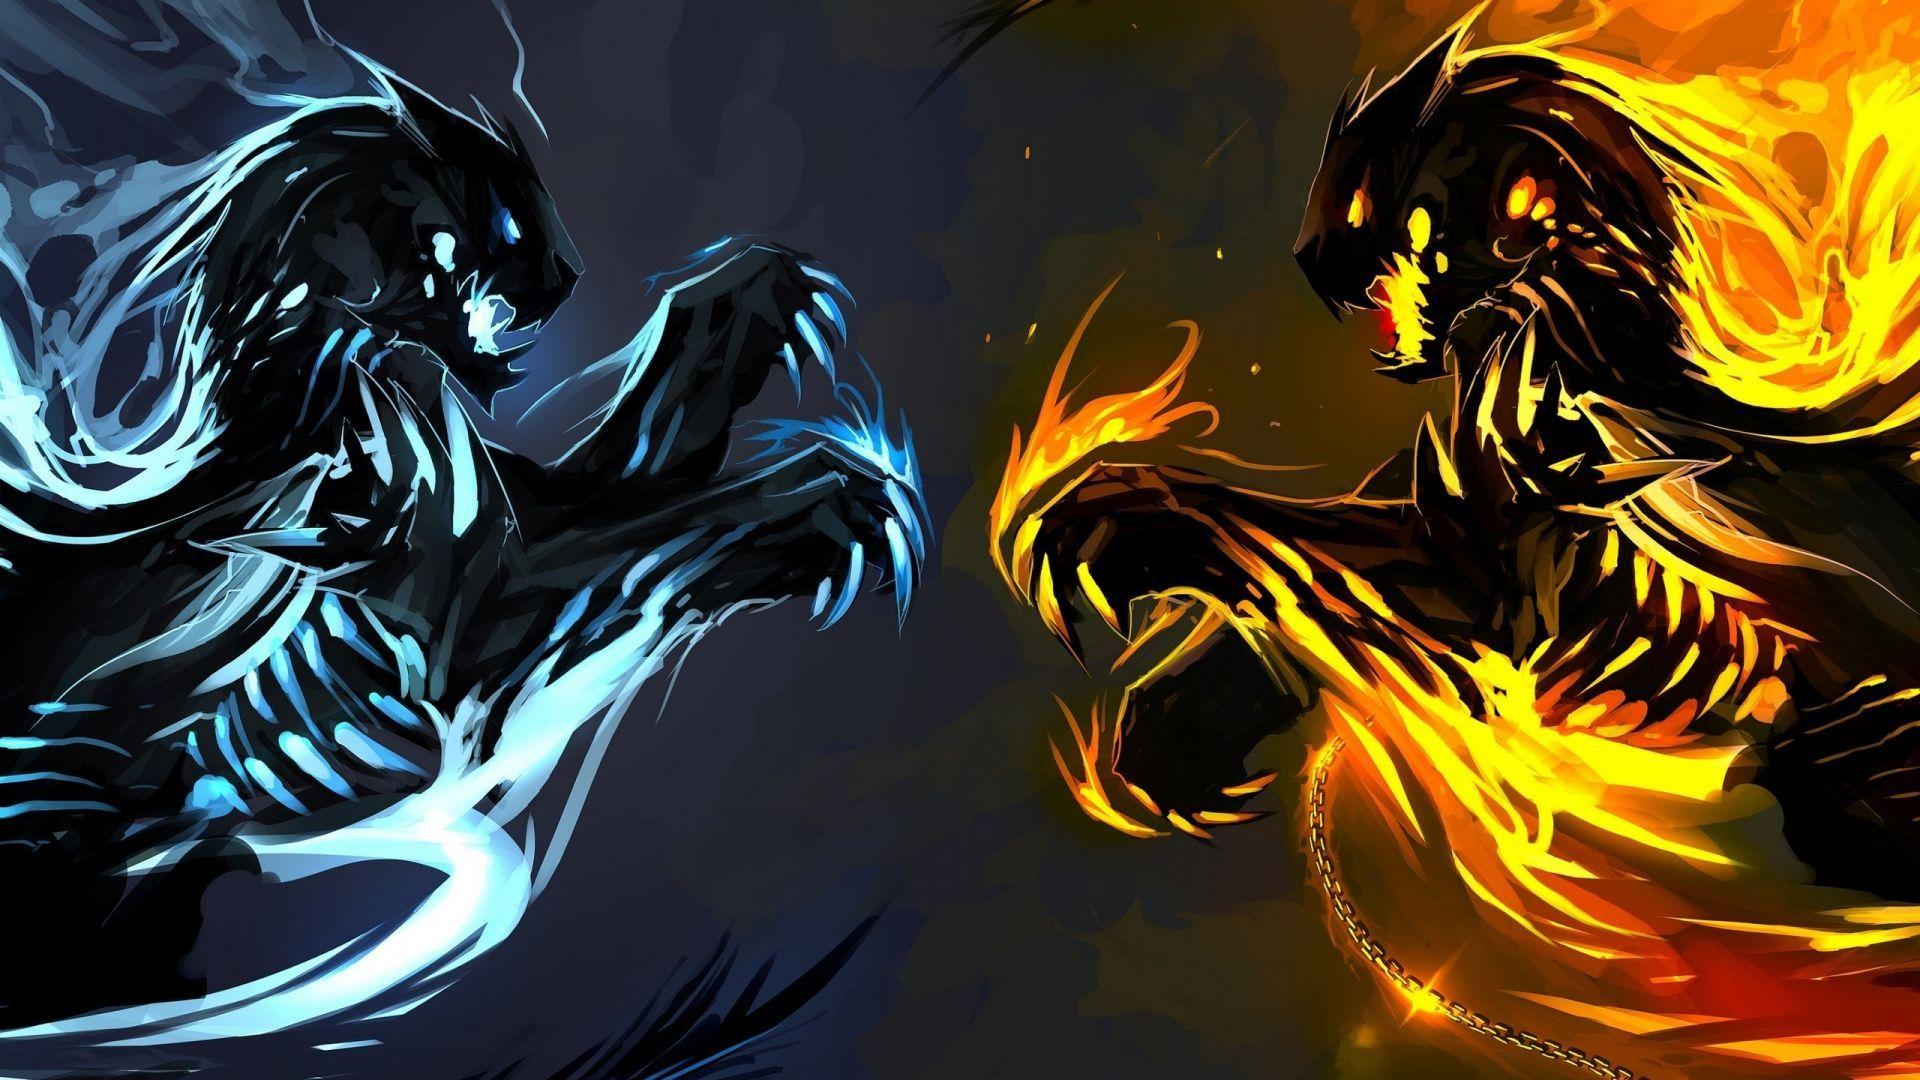 Ice and Fire Dragons wallpaper 2560x1440. I Luv Dragons